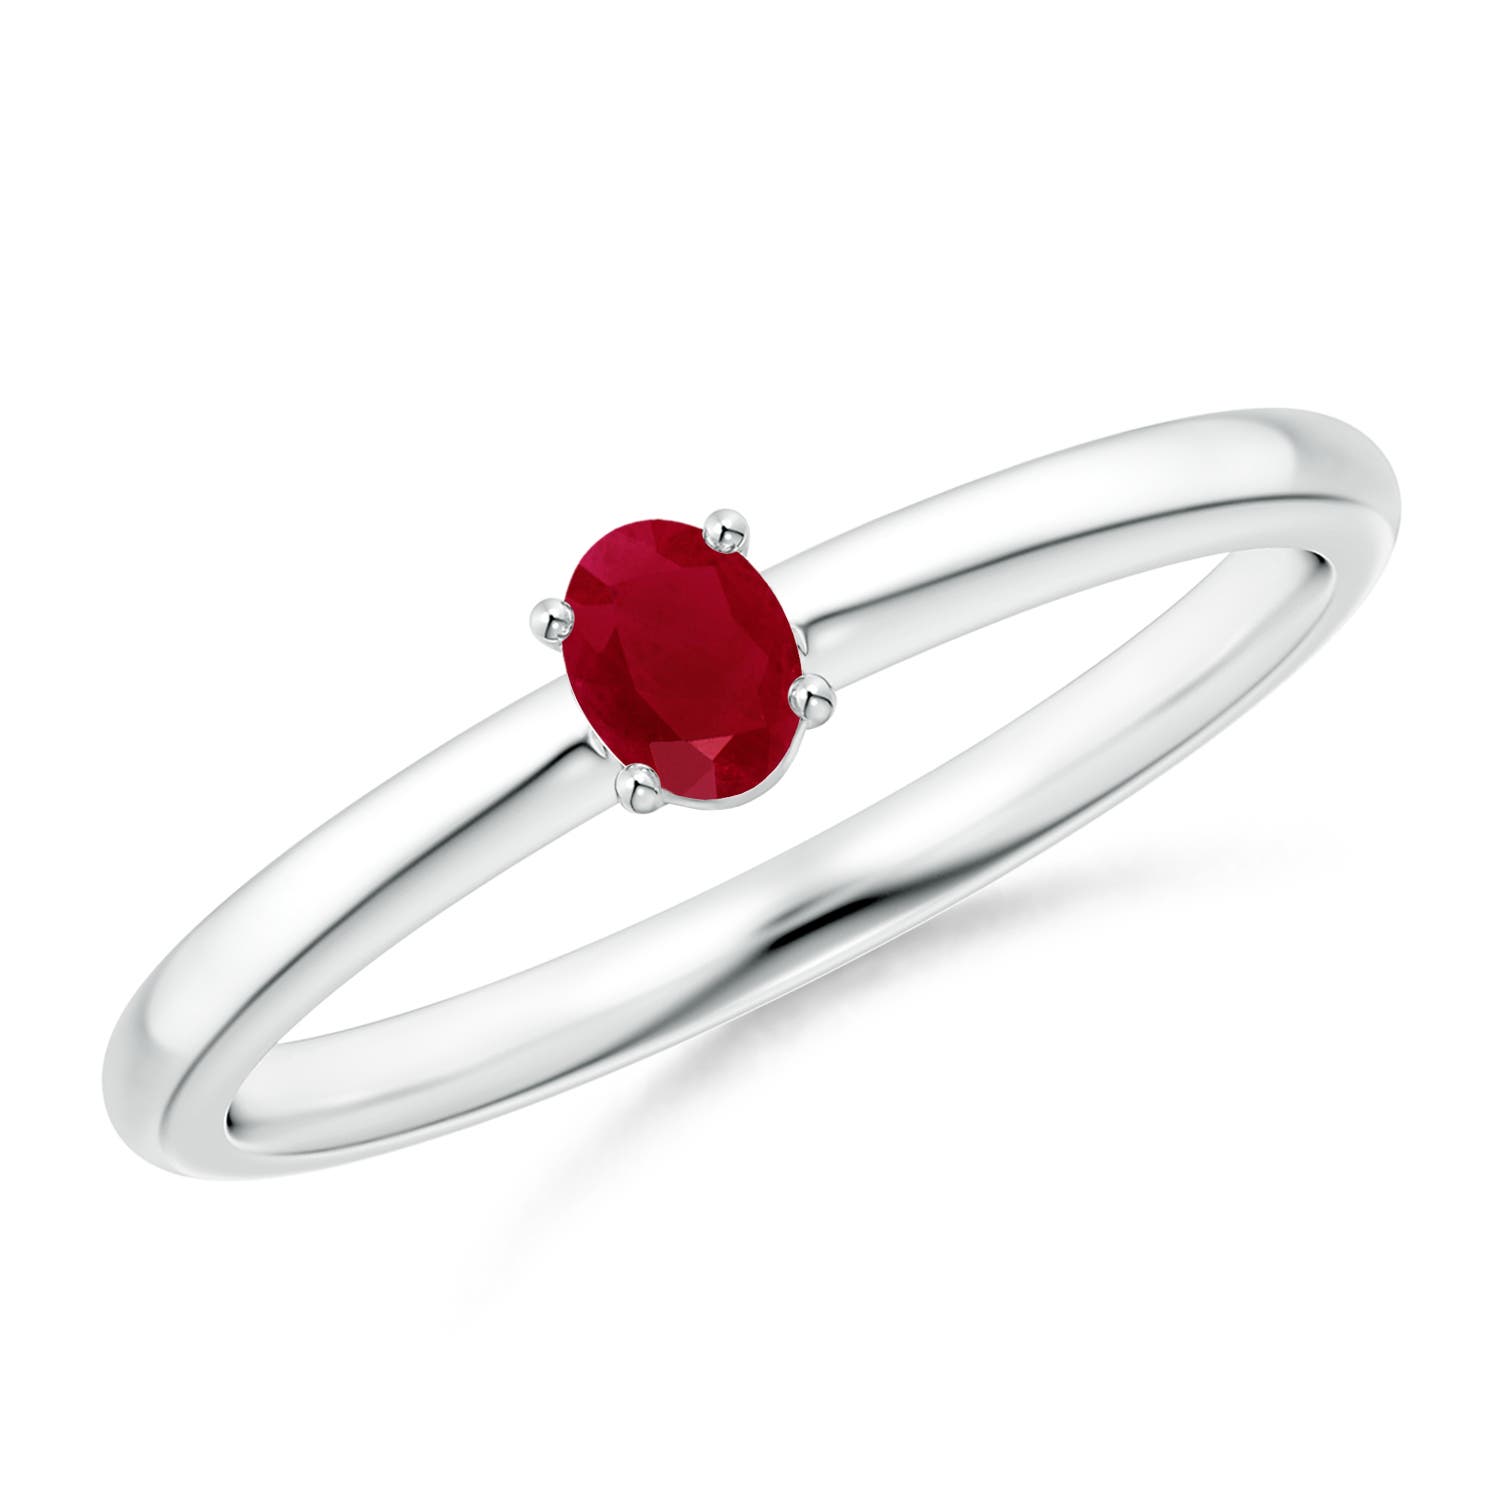 AA - Ruby / 0.2 CT / 14 KT White Gold